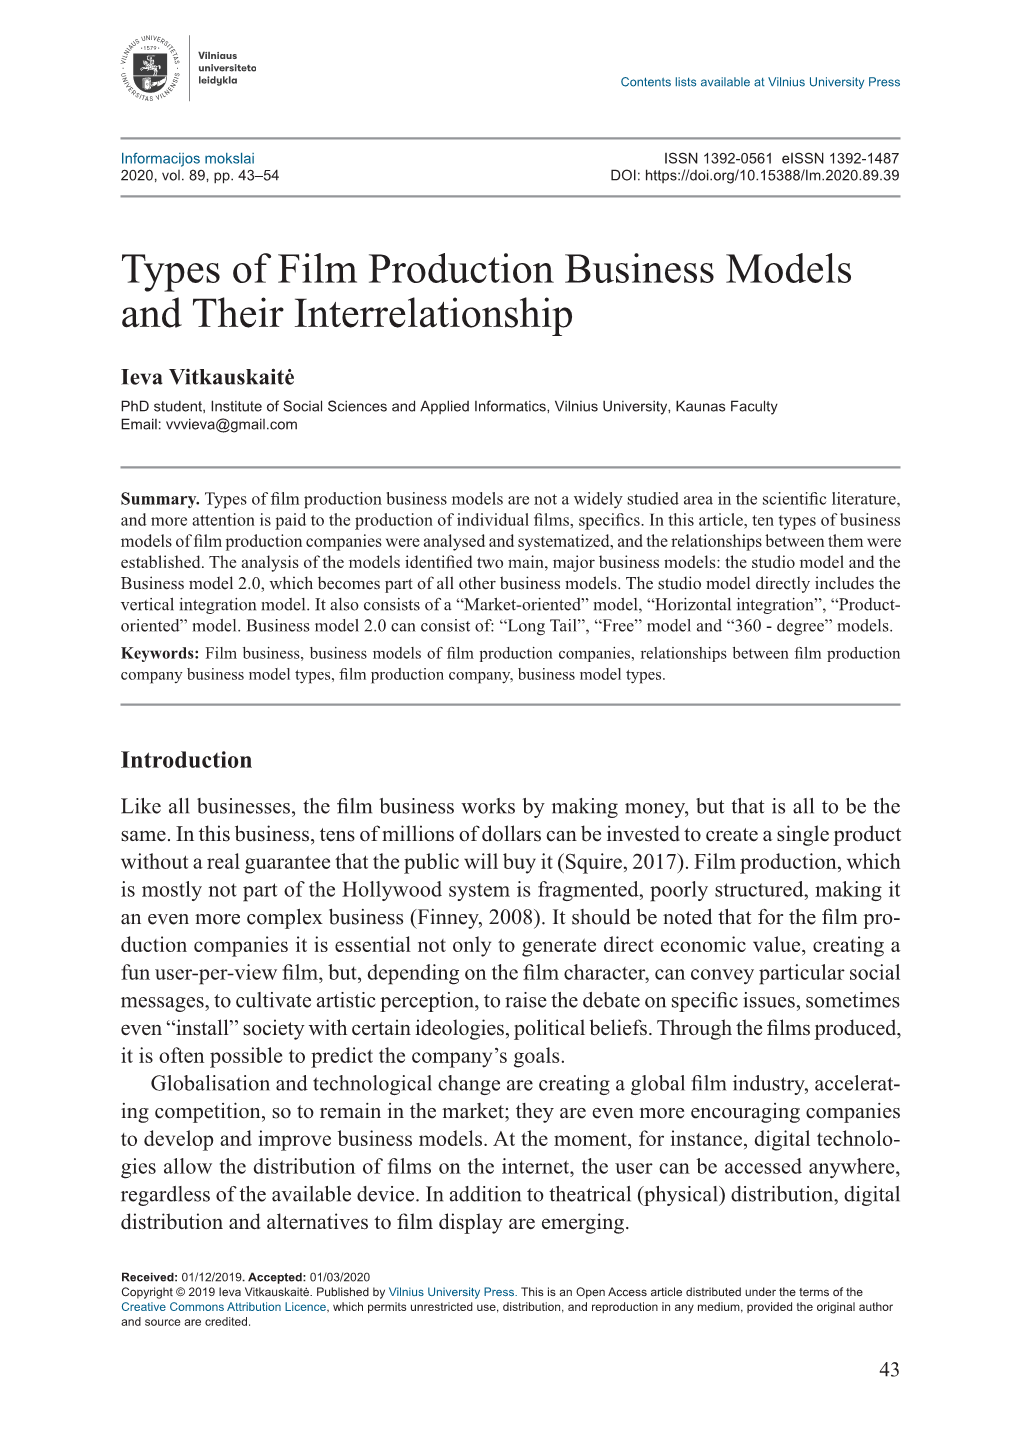 Types of Film Production Business Models and Their Interrelationship